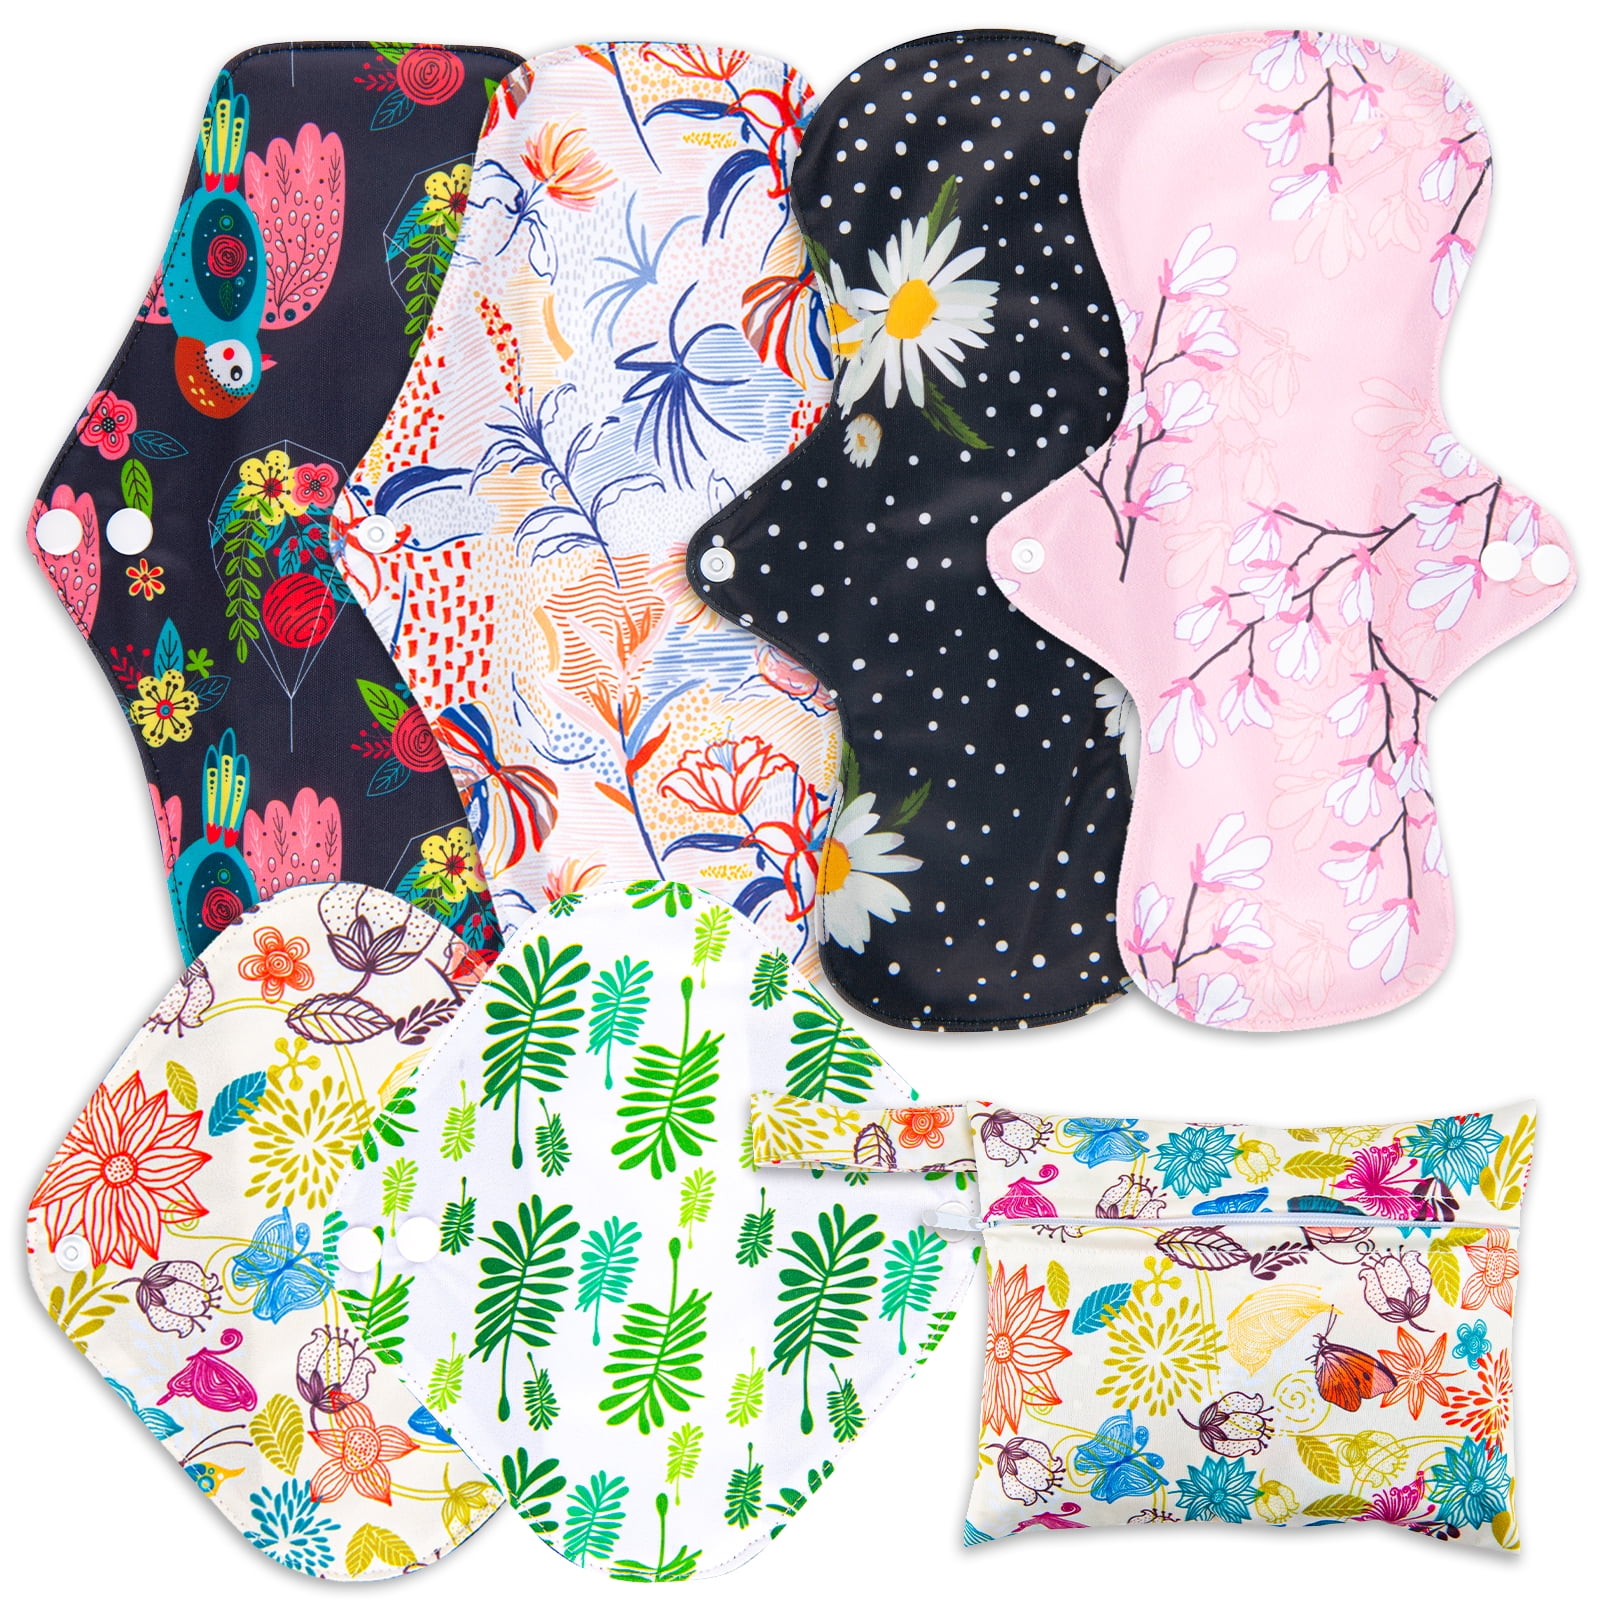 7 in 1 Reusable Menstrual Pads，6 PCs Sanitary Pad Set with Wings ...